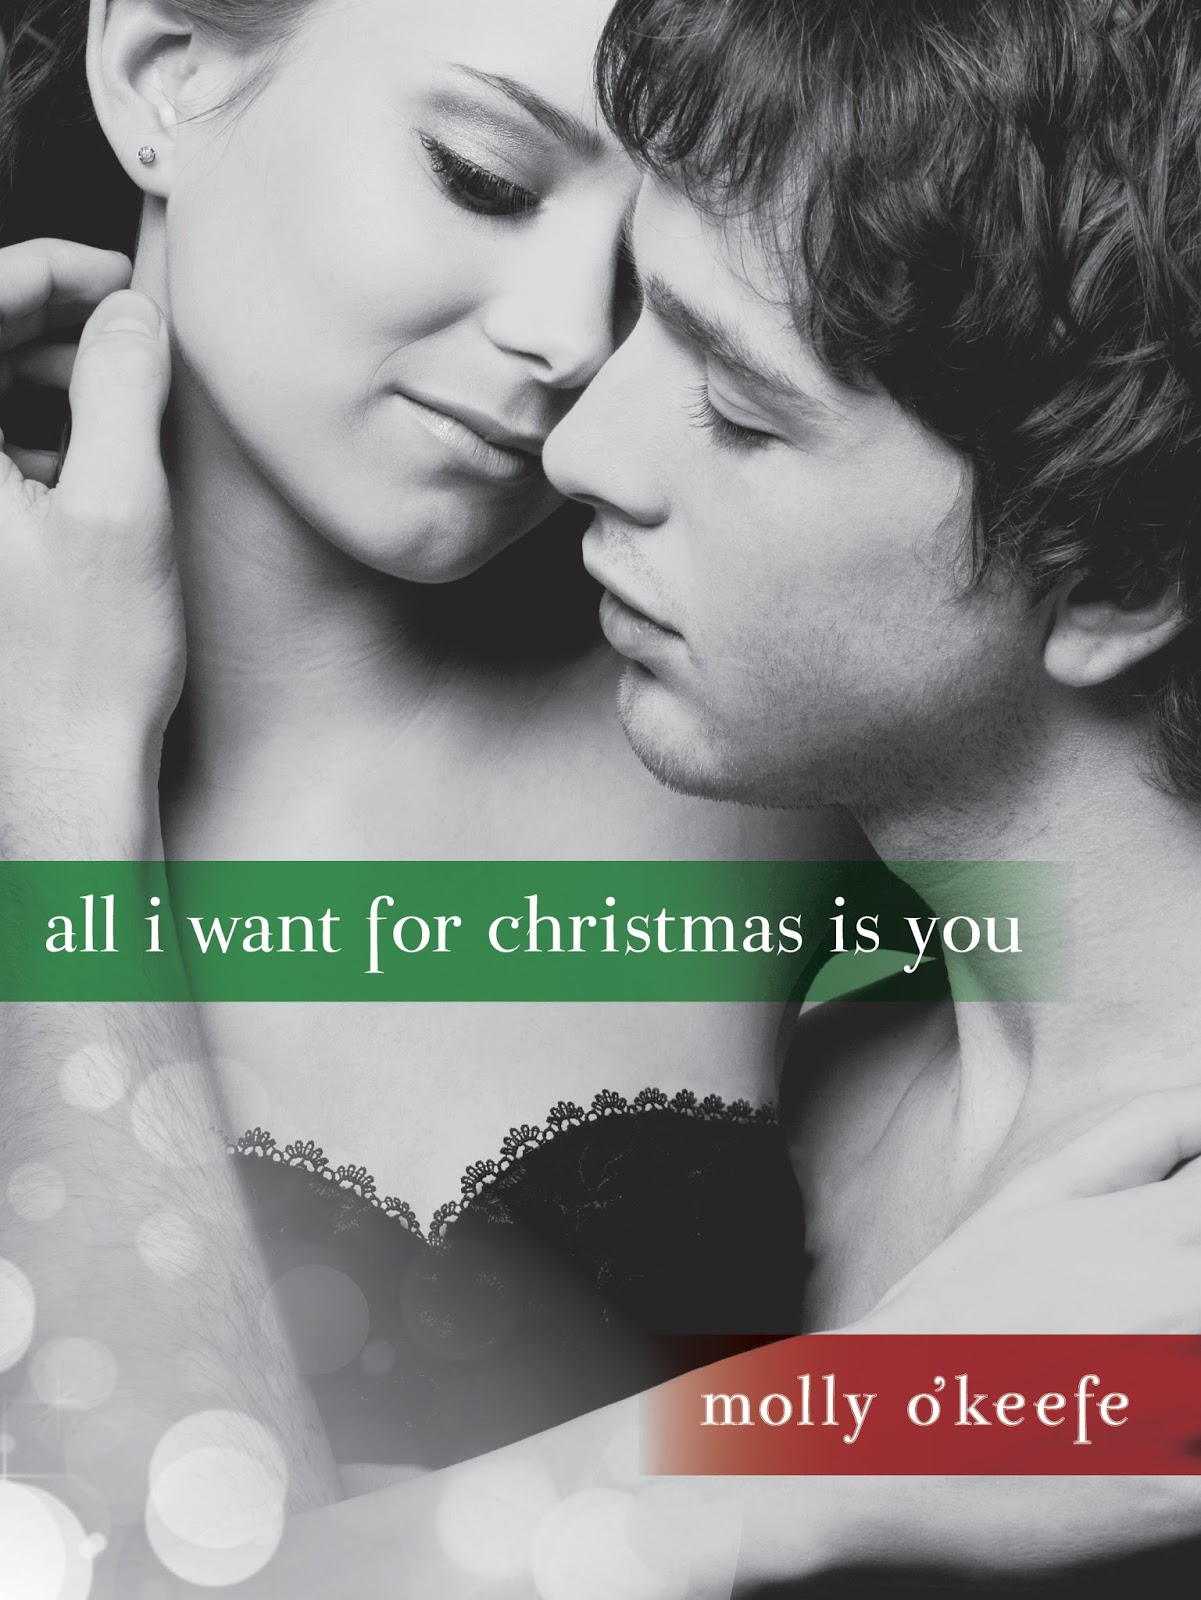 Порнхаб крисмас молли текст. All i want for Christmas is you. Christmas Molly. All want is you фото.